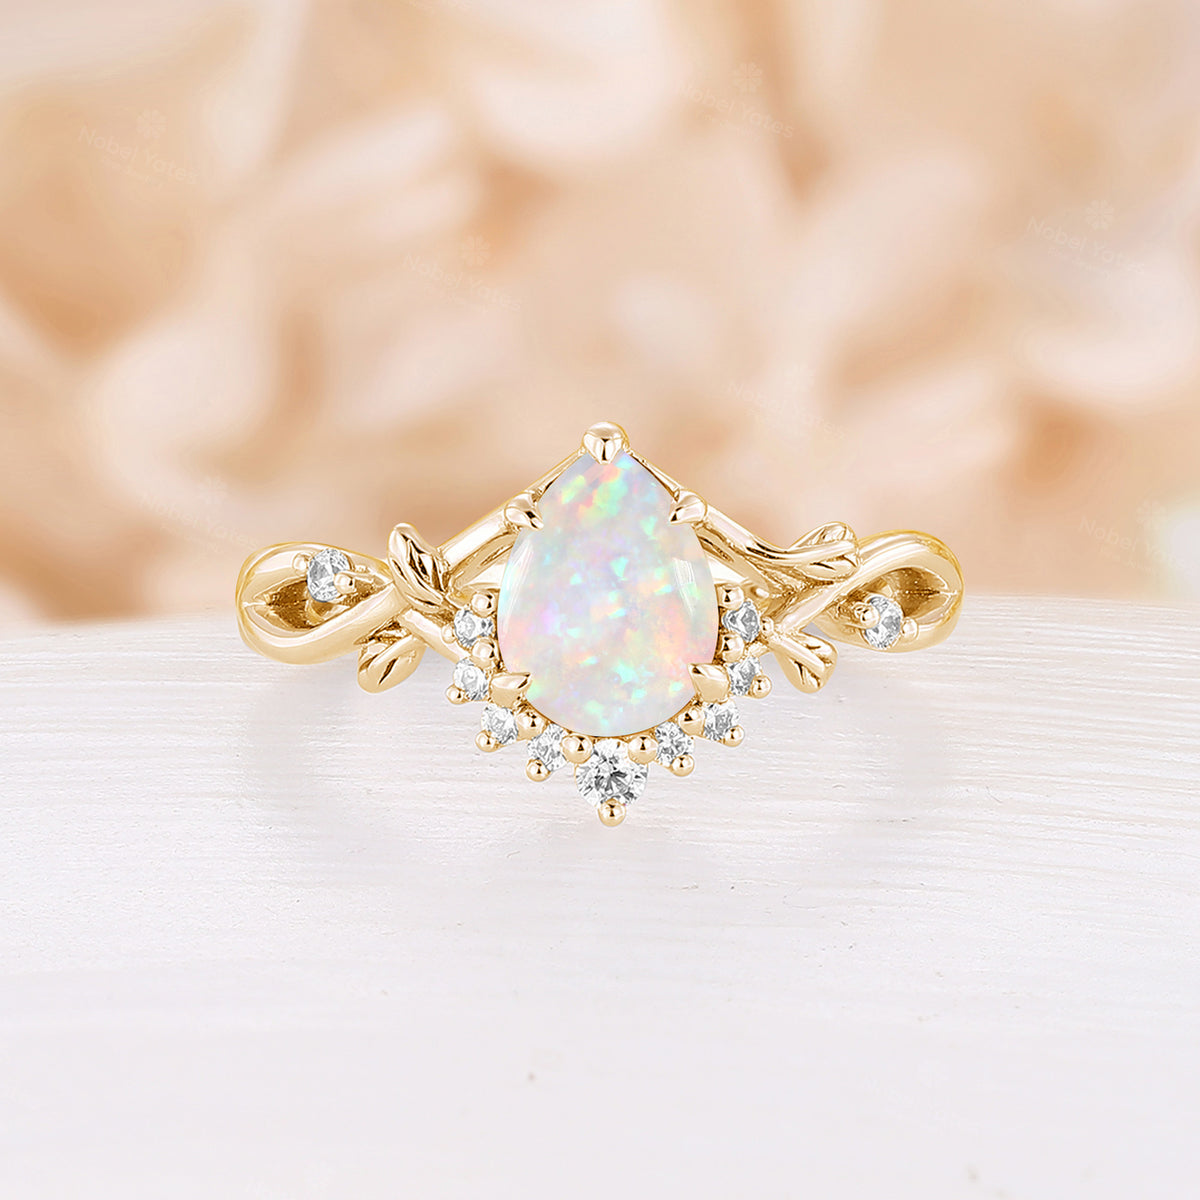 Pear White Opal Nature Inspired Rose Gold Engagement Ring Twist Band